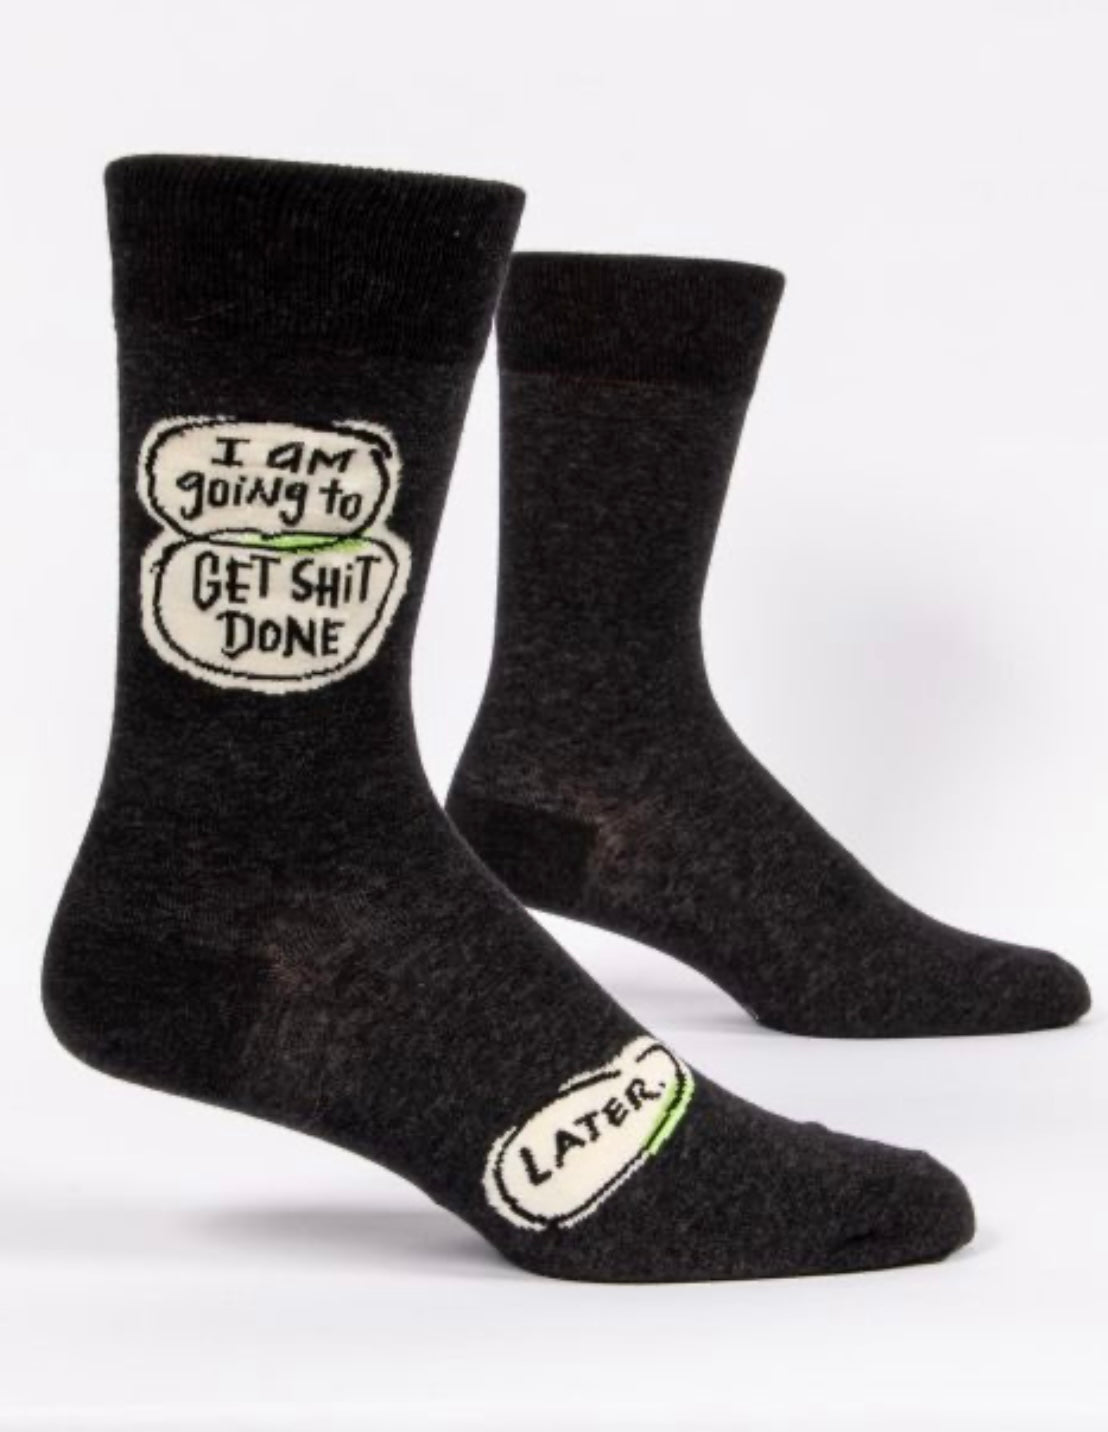 I Am Going to Get Shit Done Later Men's Crew Novelty Socks